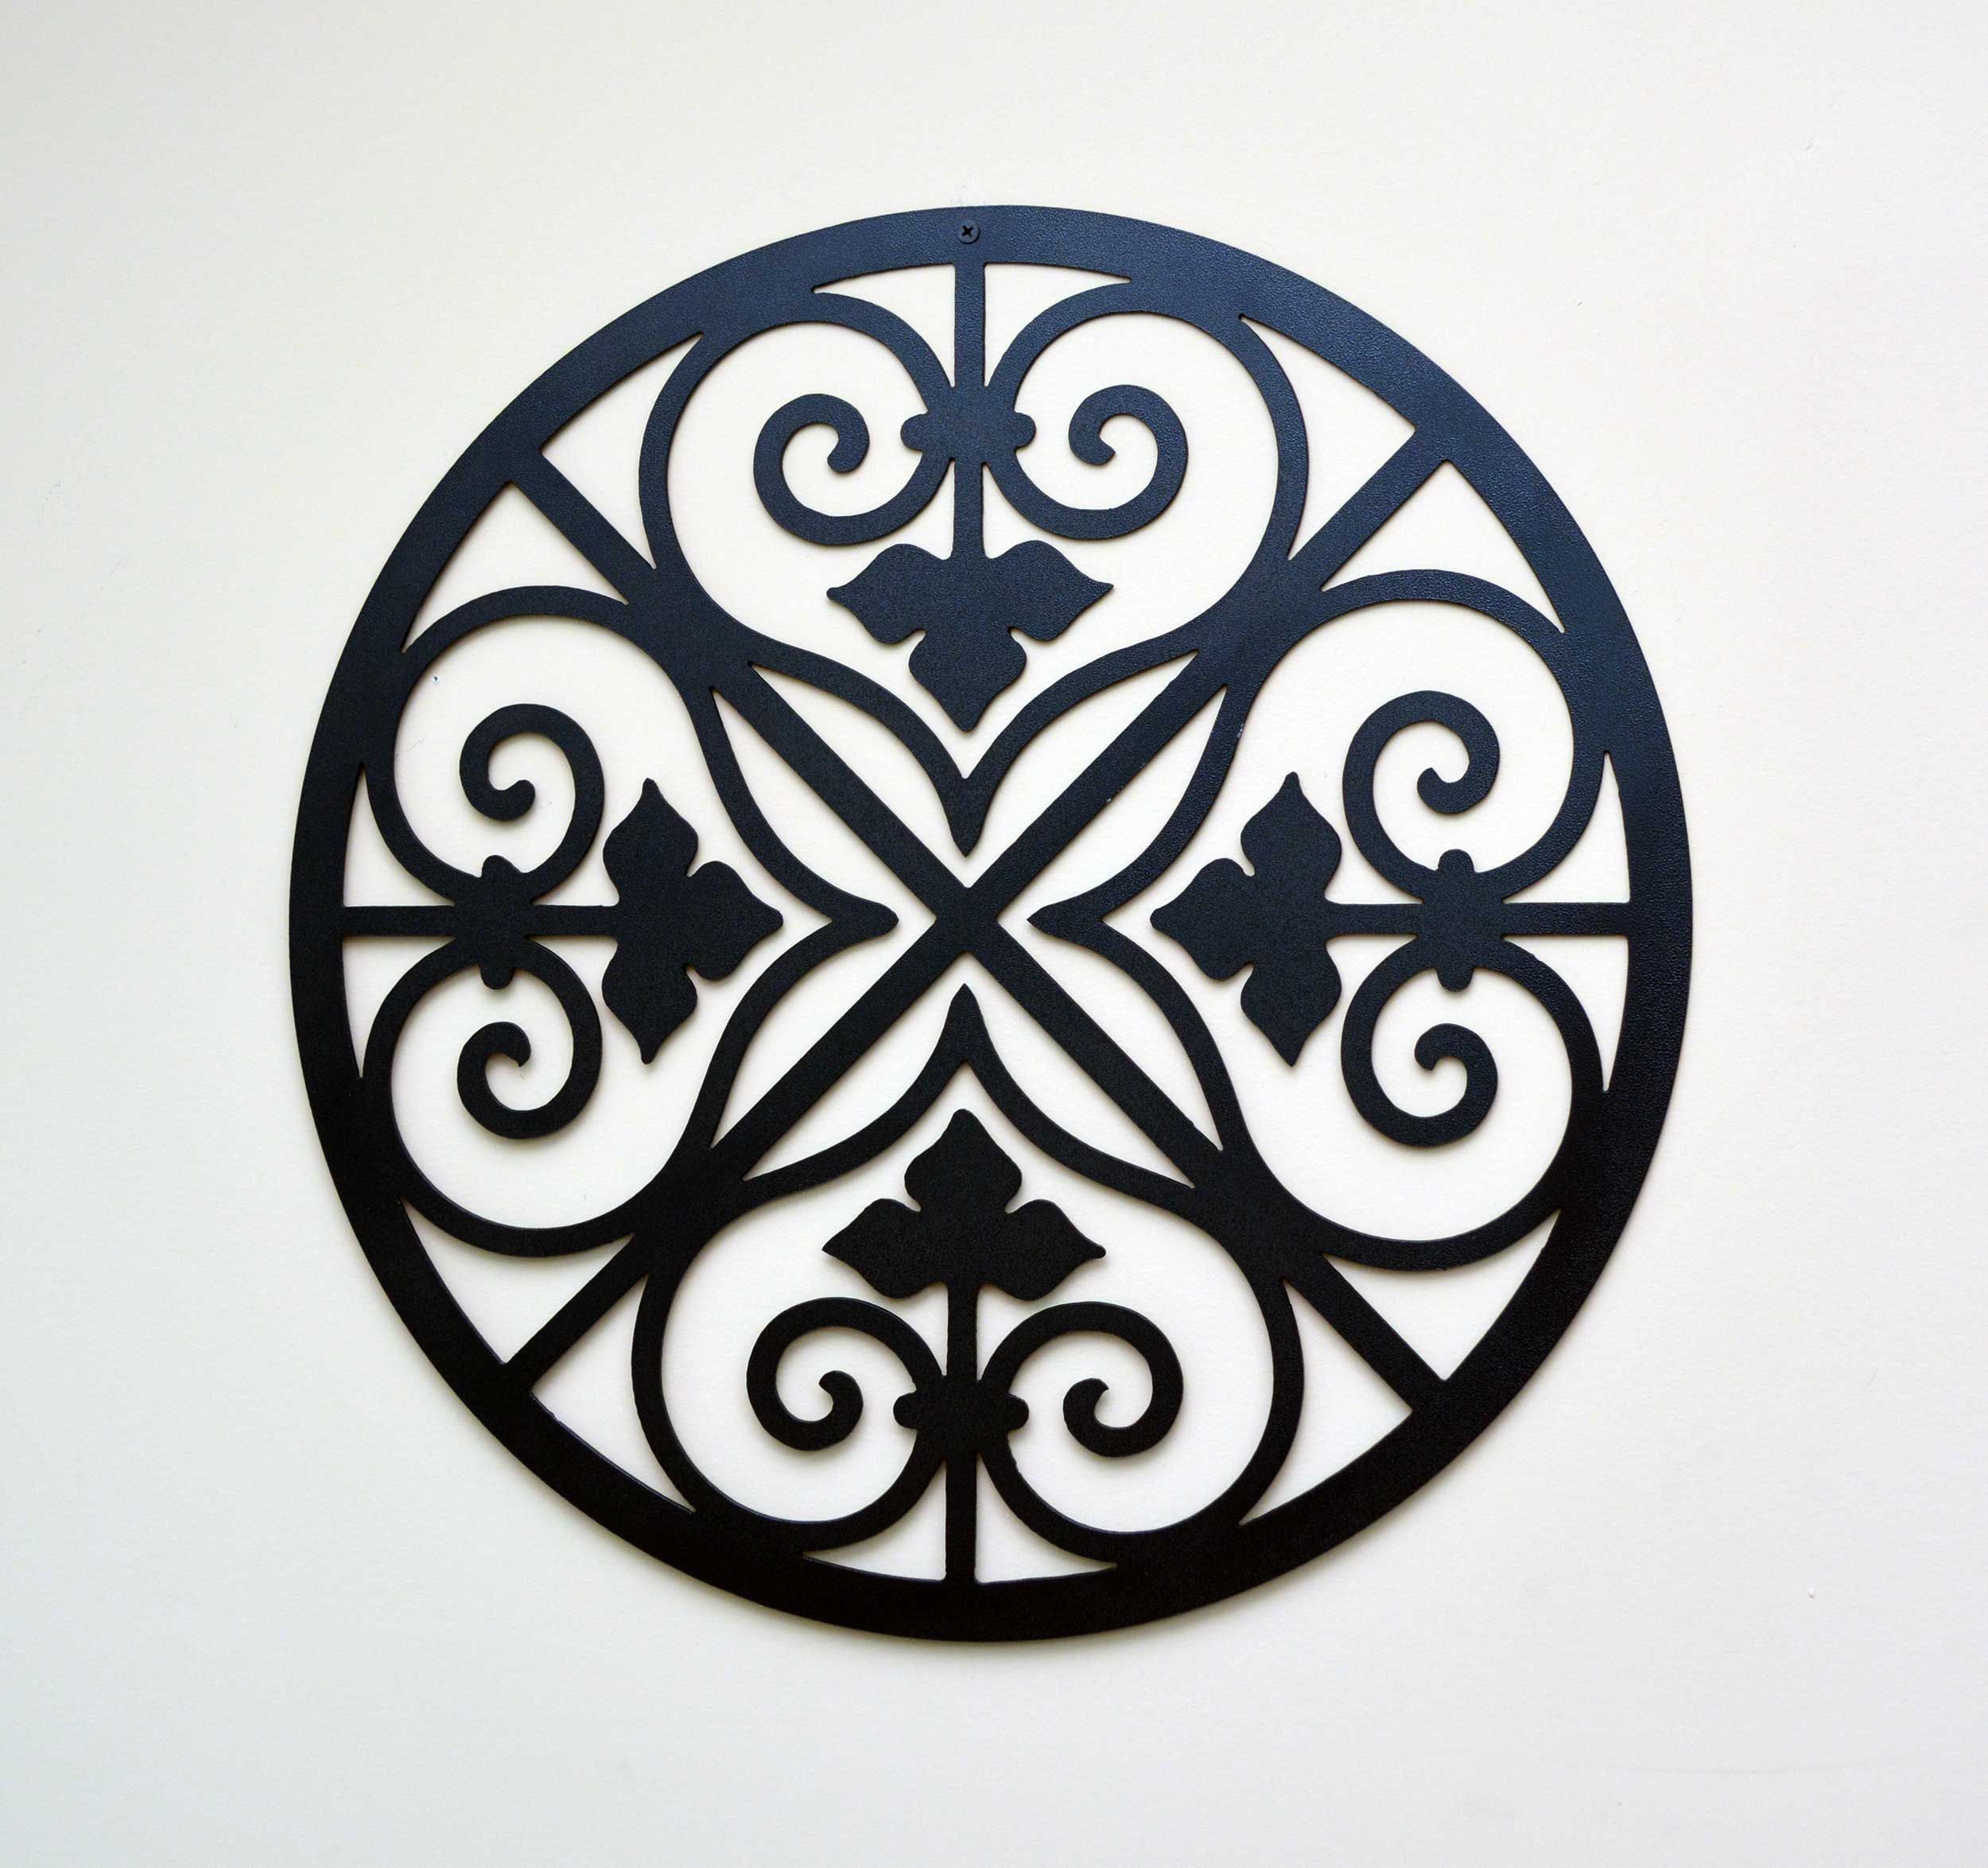 Round Metal Scroll Design Wall Decor, Home Decor For Latest Glossy Circle Metal Wall Art (View 4 of 20)